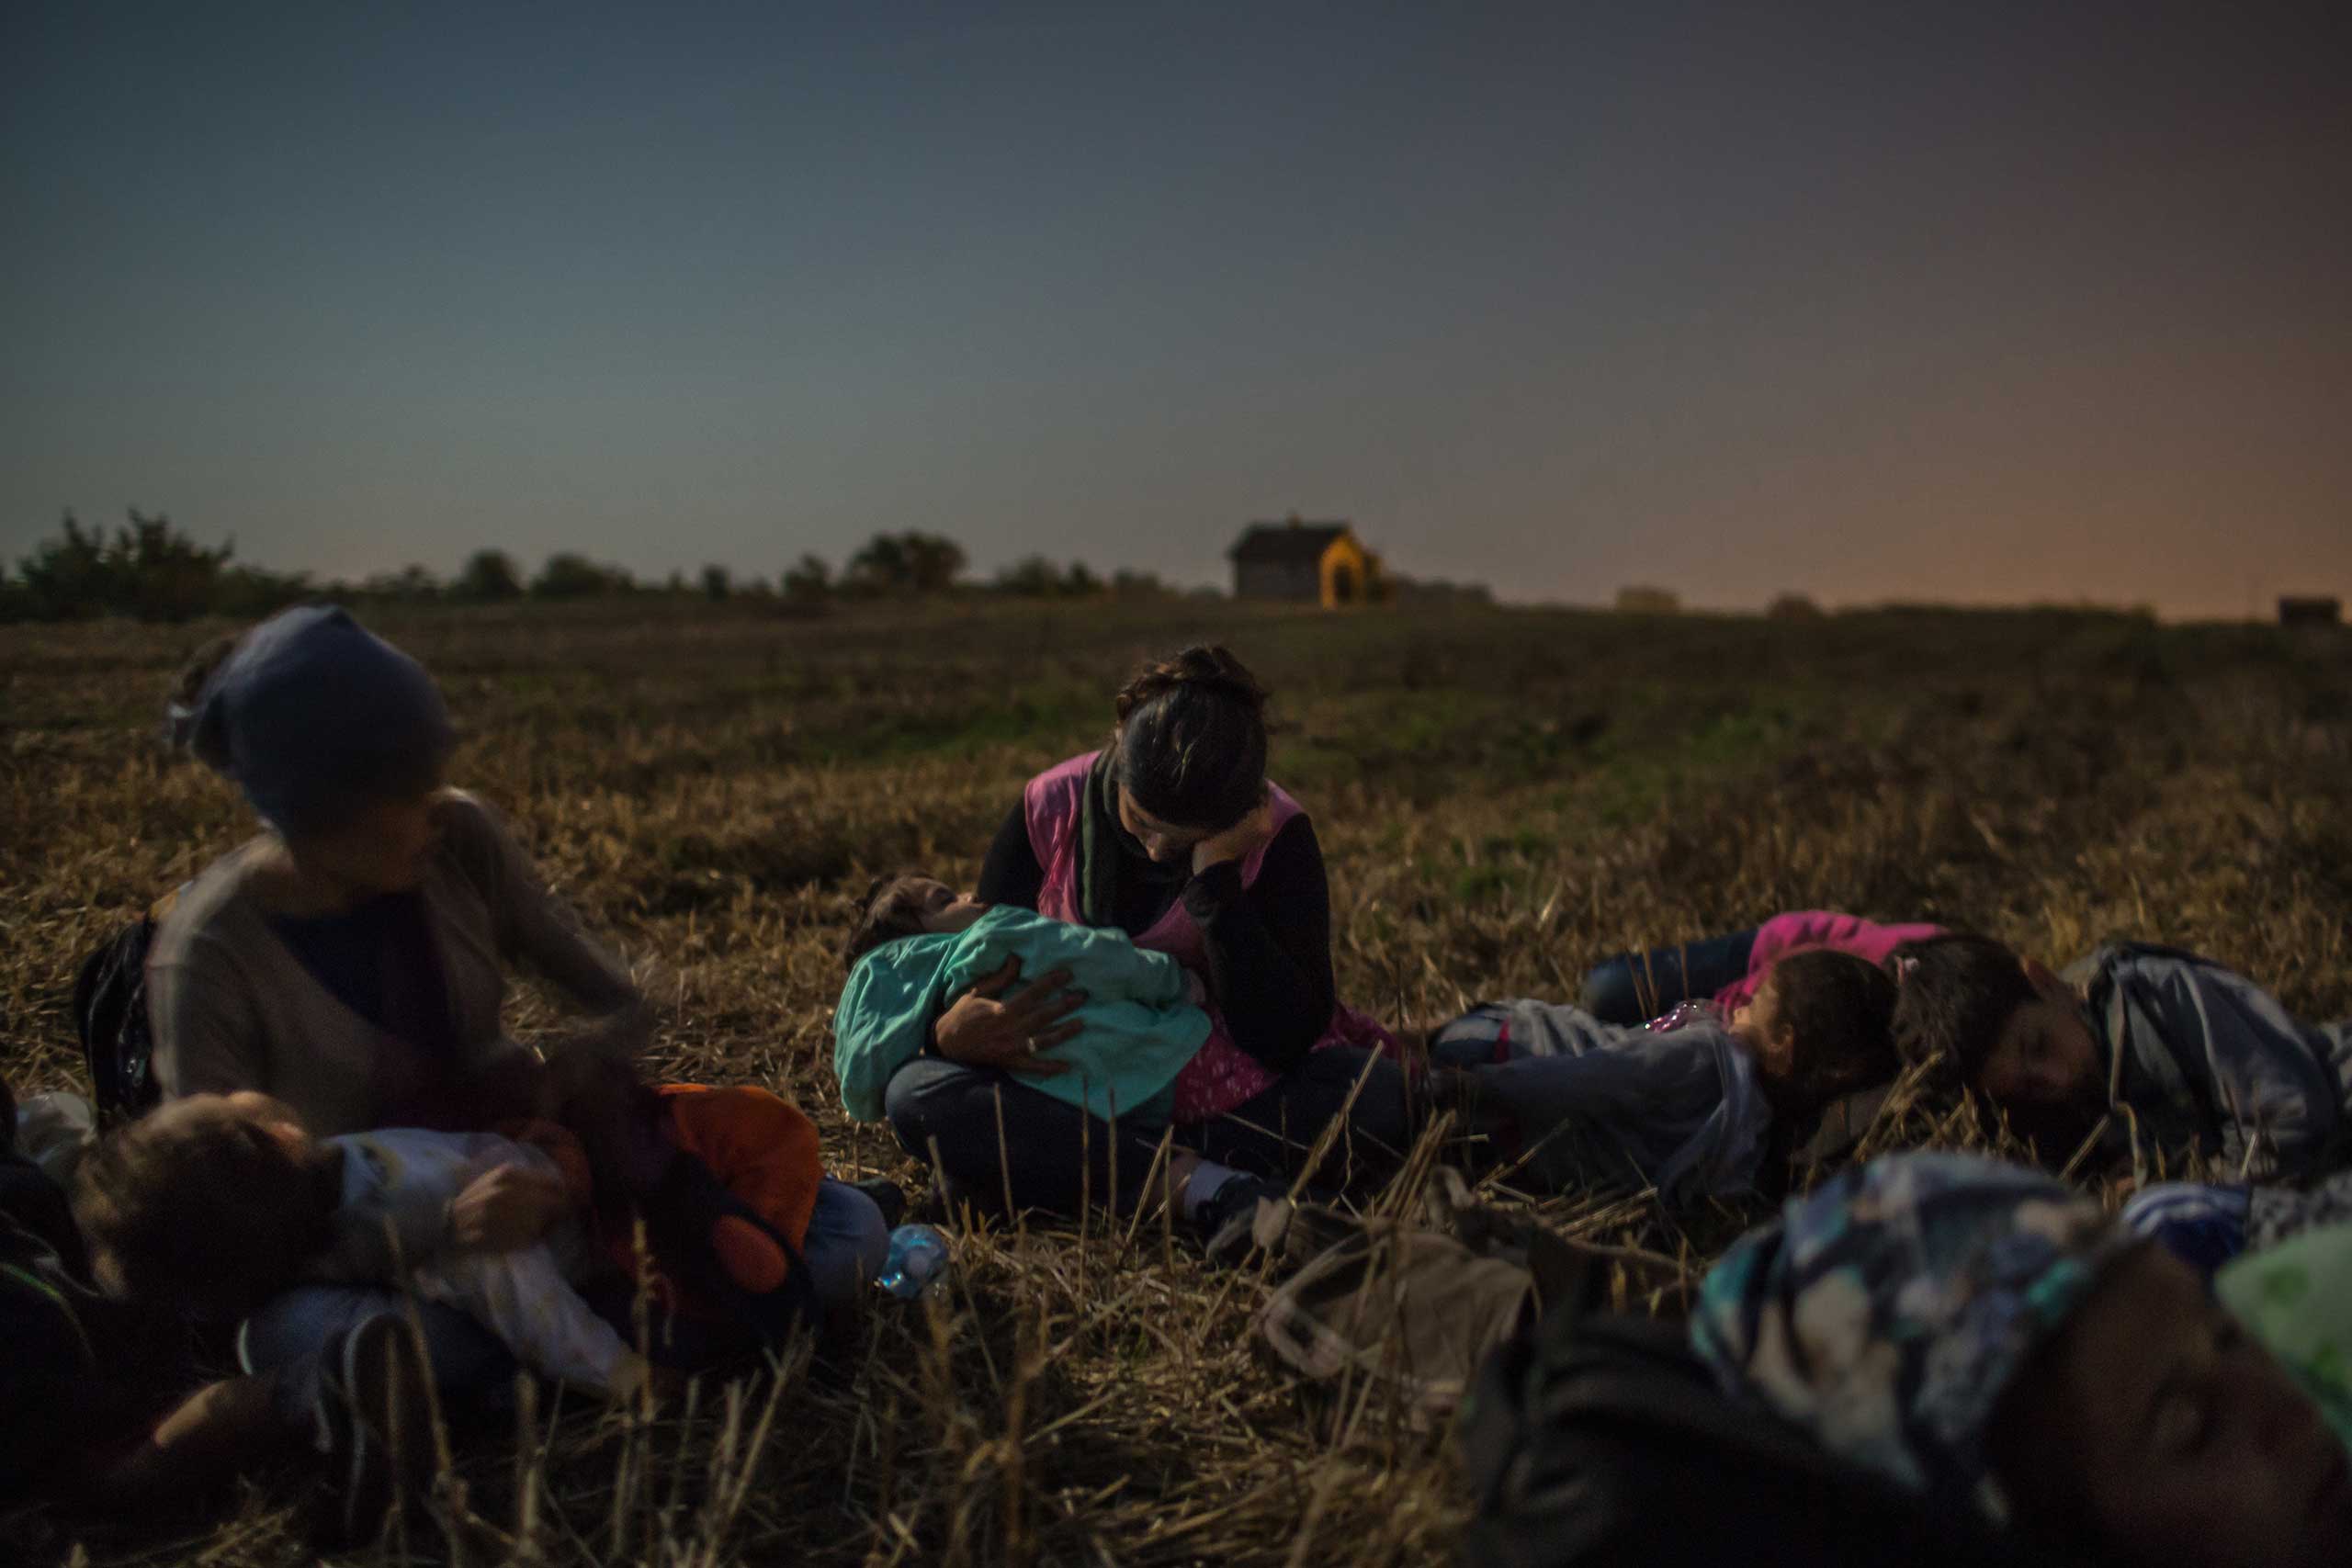 Members of the Majid family from Iraq sleep with their children in their arms in a wheat field as they wait to cross the barbed wire fence at Horgos, Serbia, into Hungary. Aug. 31, 2015.